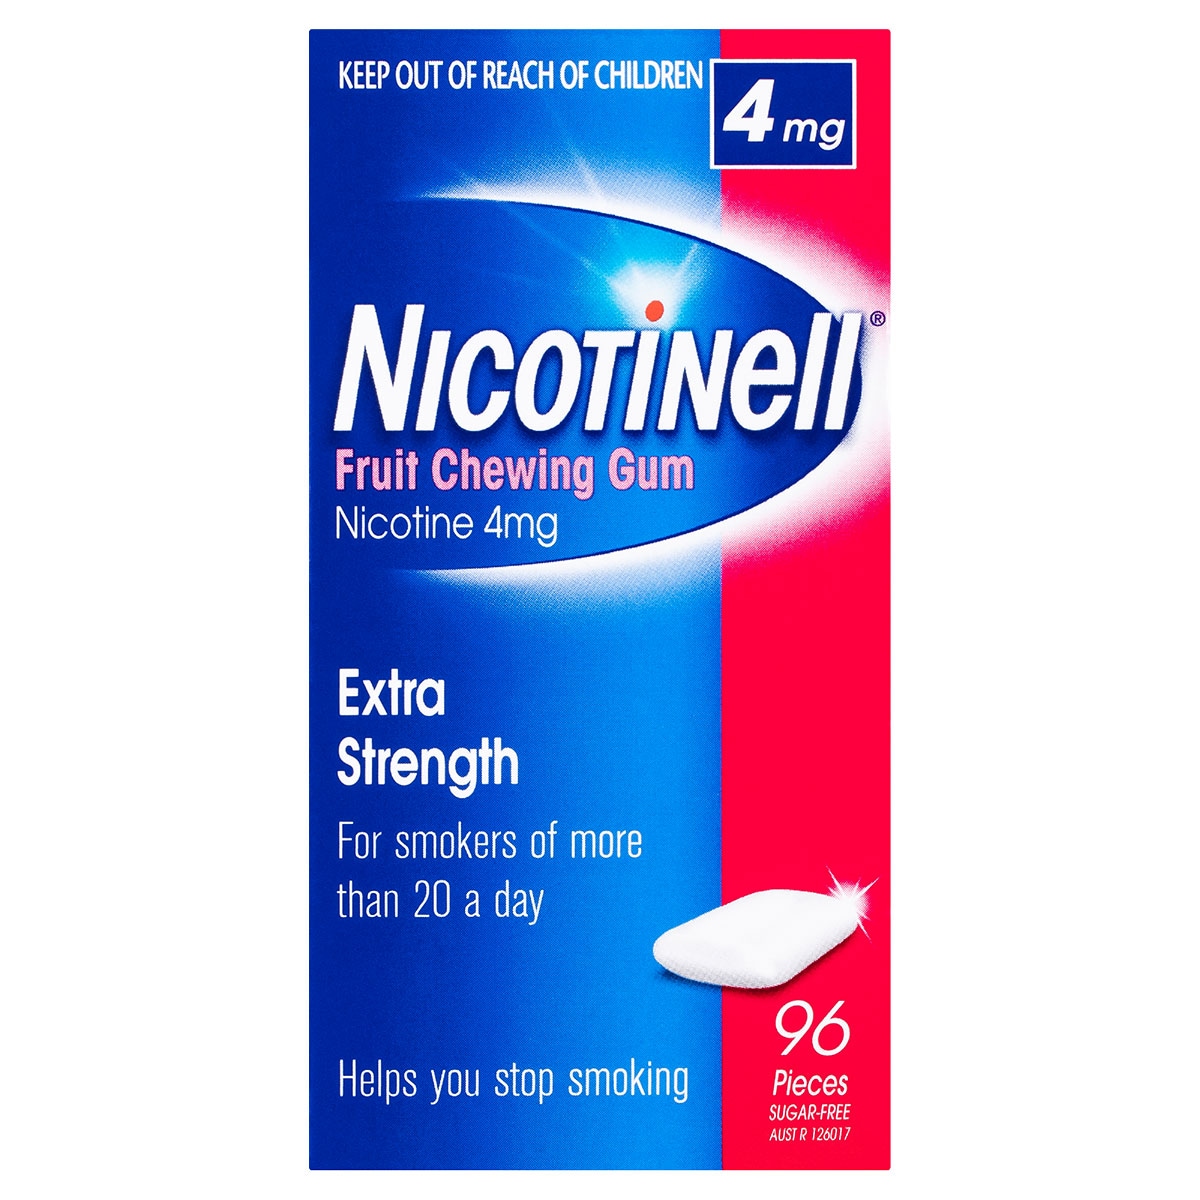 Nicotinell Chewing Gum Fruit 4mg 96 Pieces